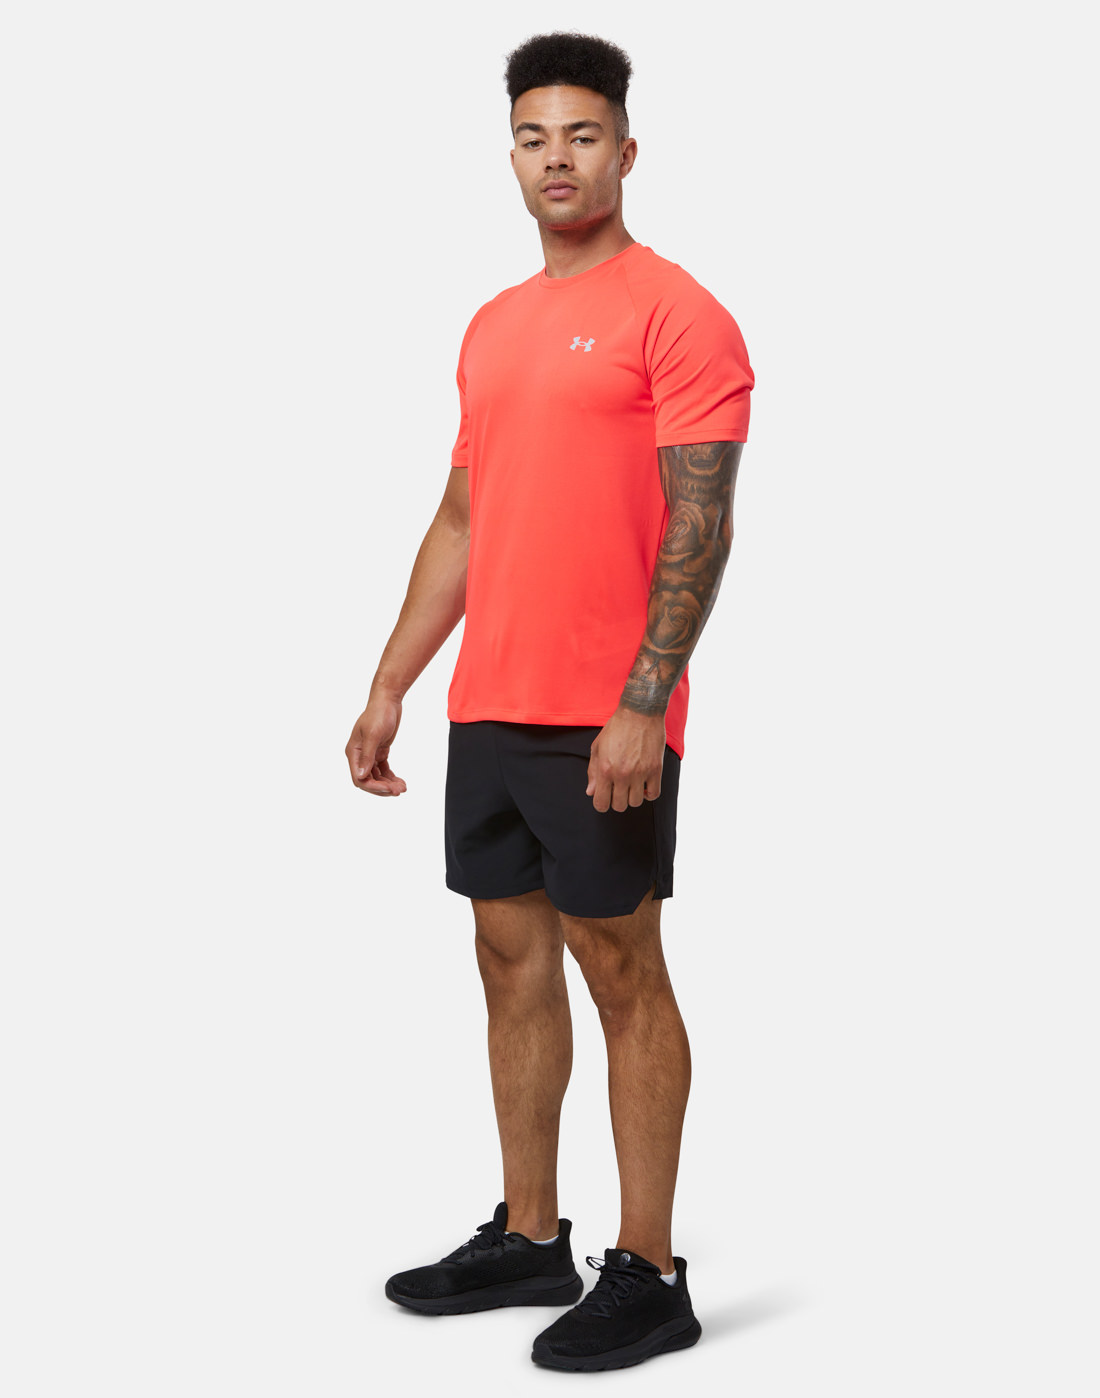 Under Armour Mens Reflective Tech T-Shirt - Red | Life Style Sports IE